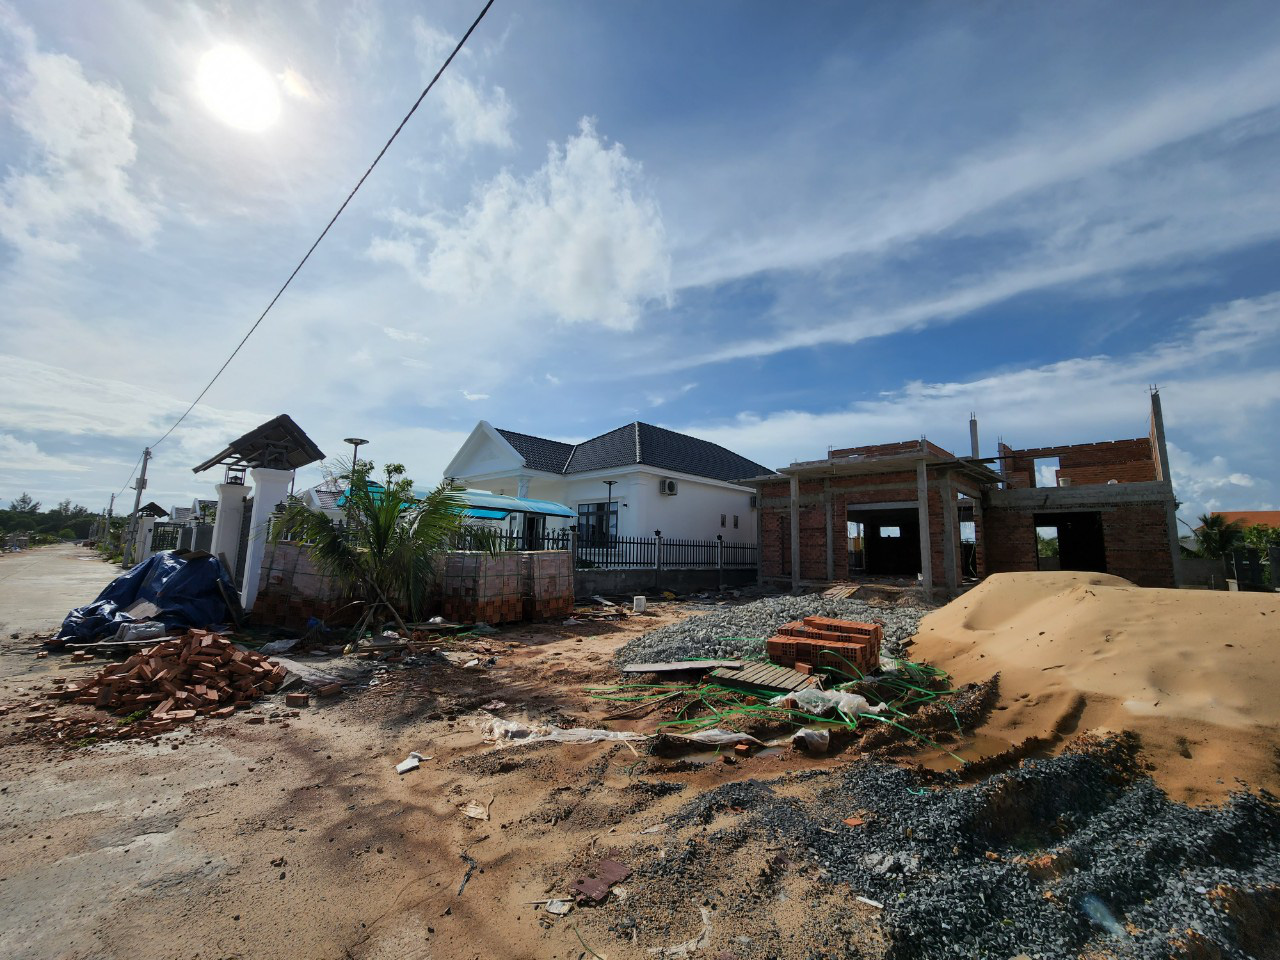 678 land encroachment, illegal construction cases in Vietnam’s Phu Quoc to face investigation